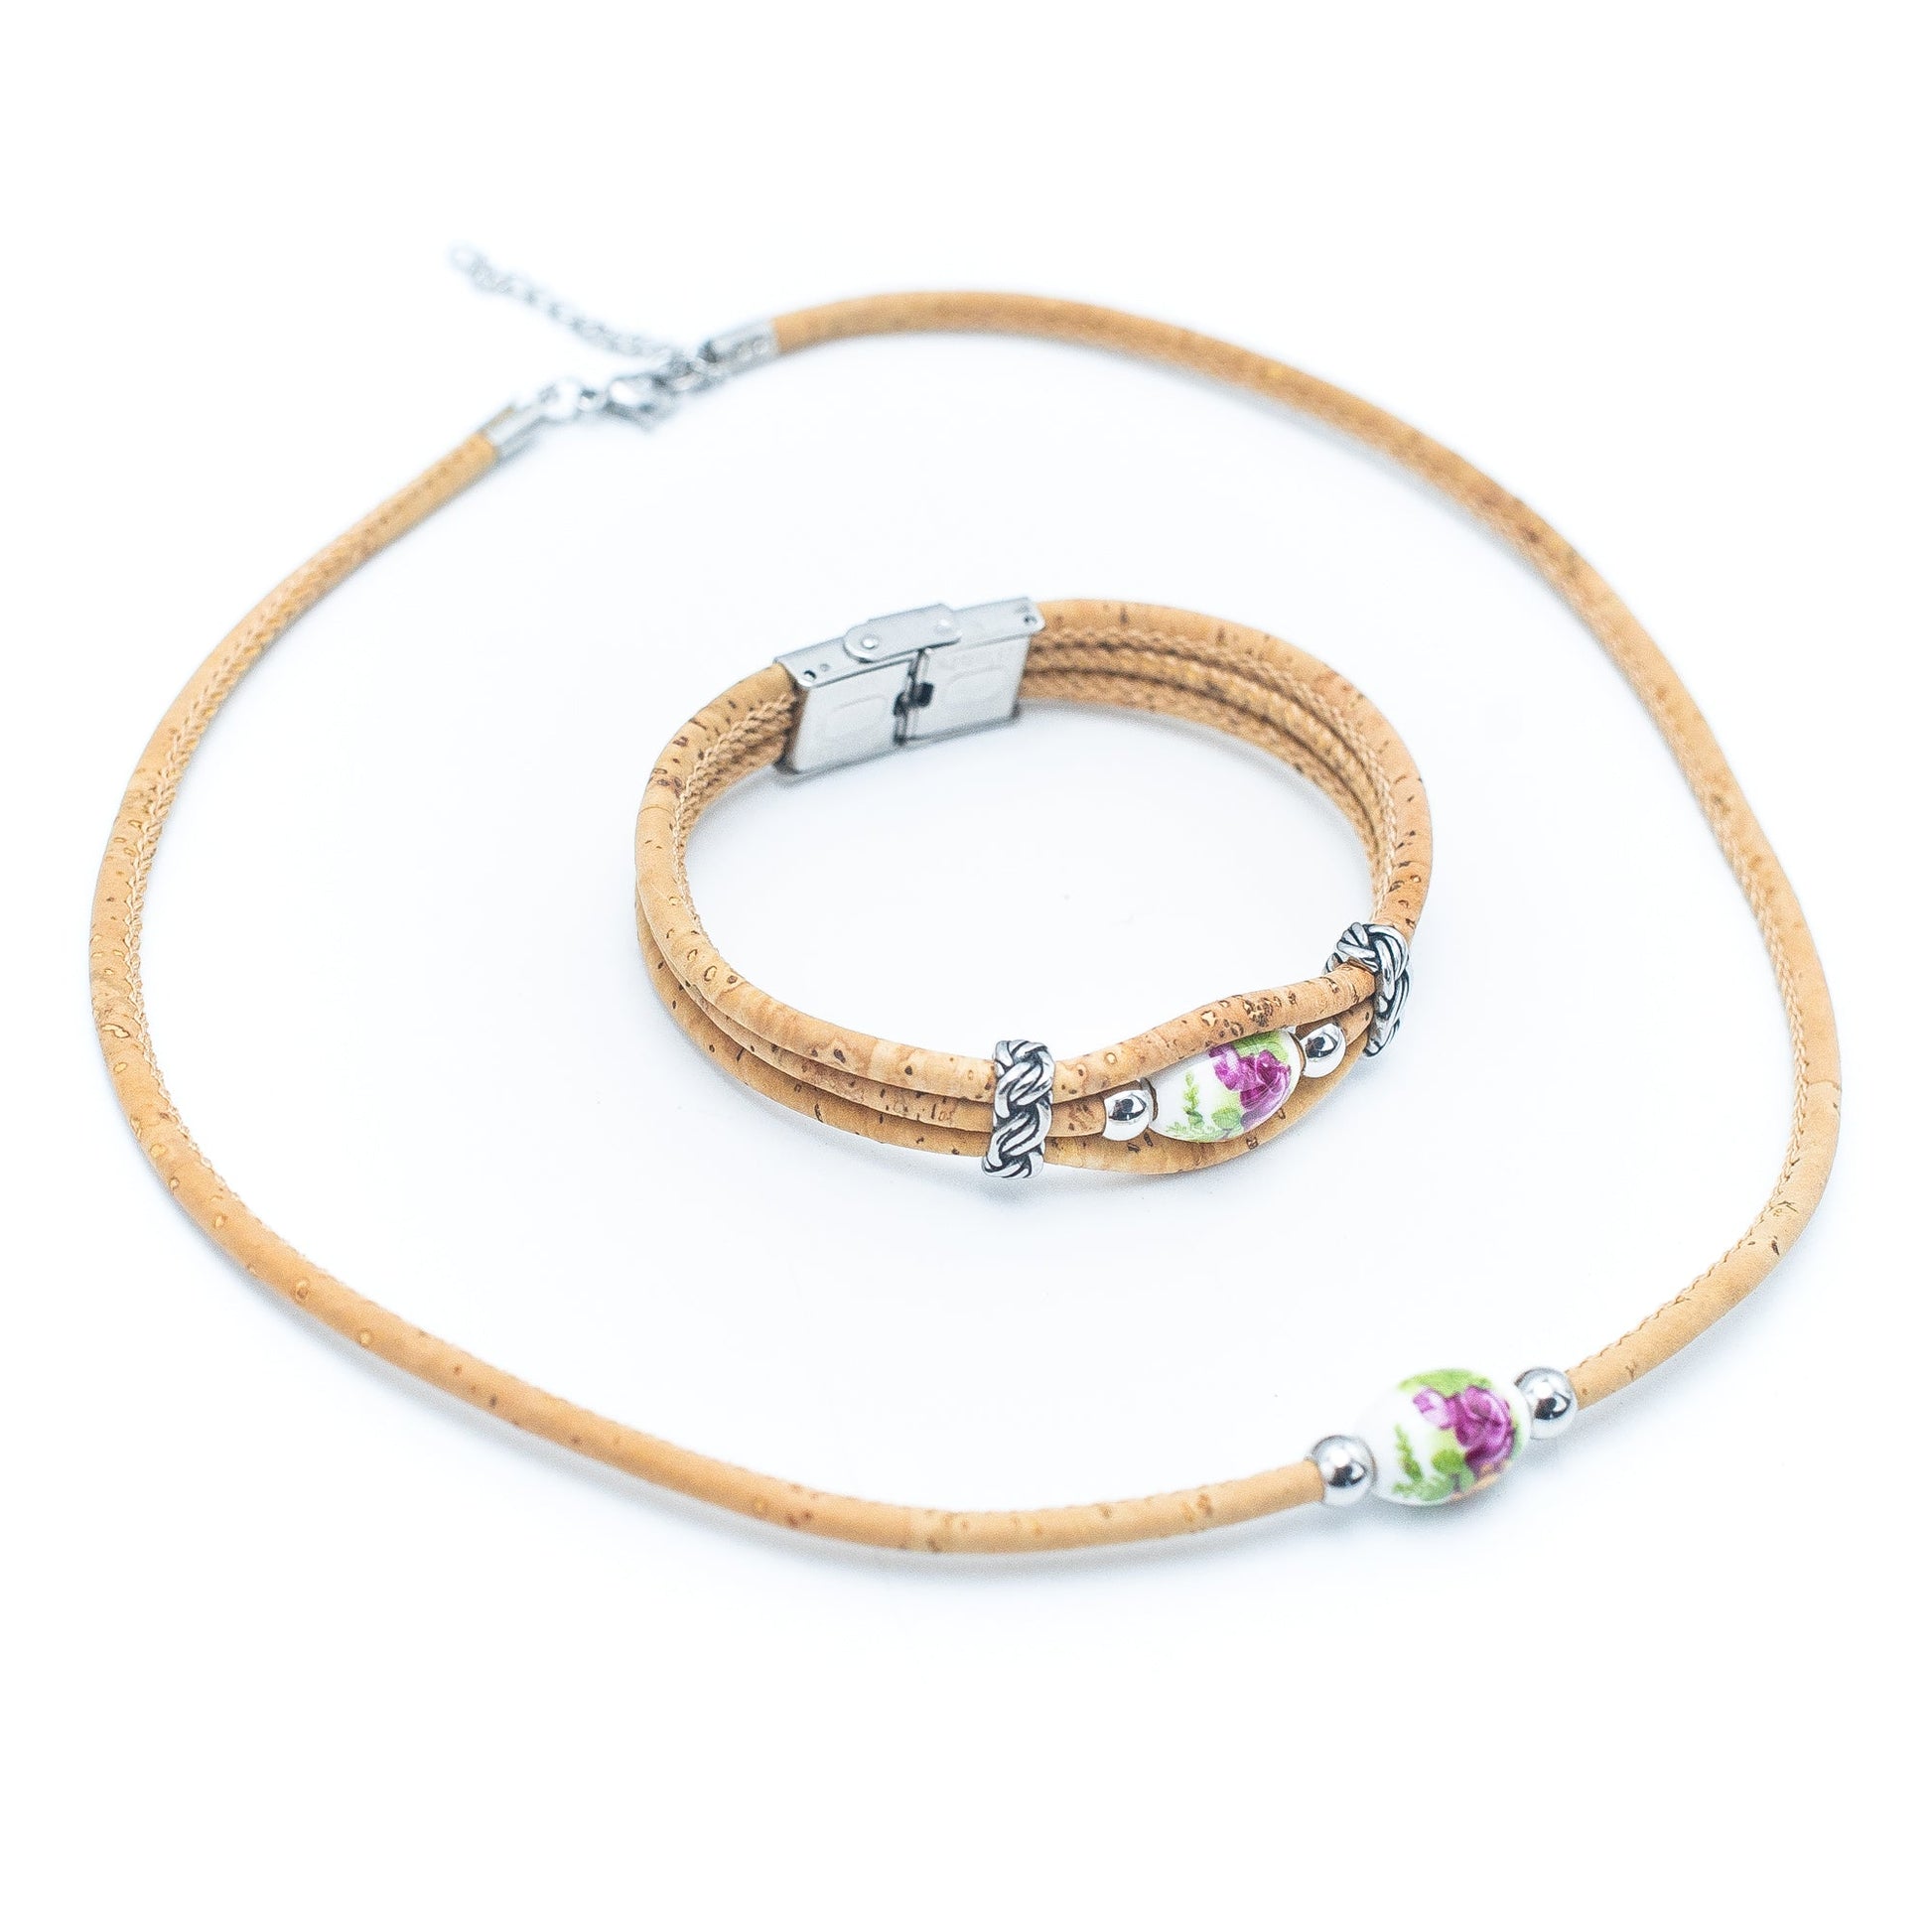 Cork & Stainless Steel Necklace & Bracelet | THE CORK COLLECTION